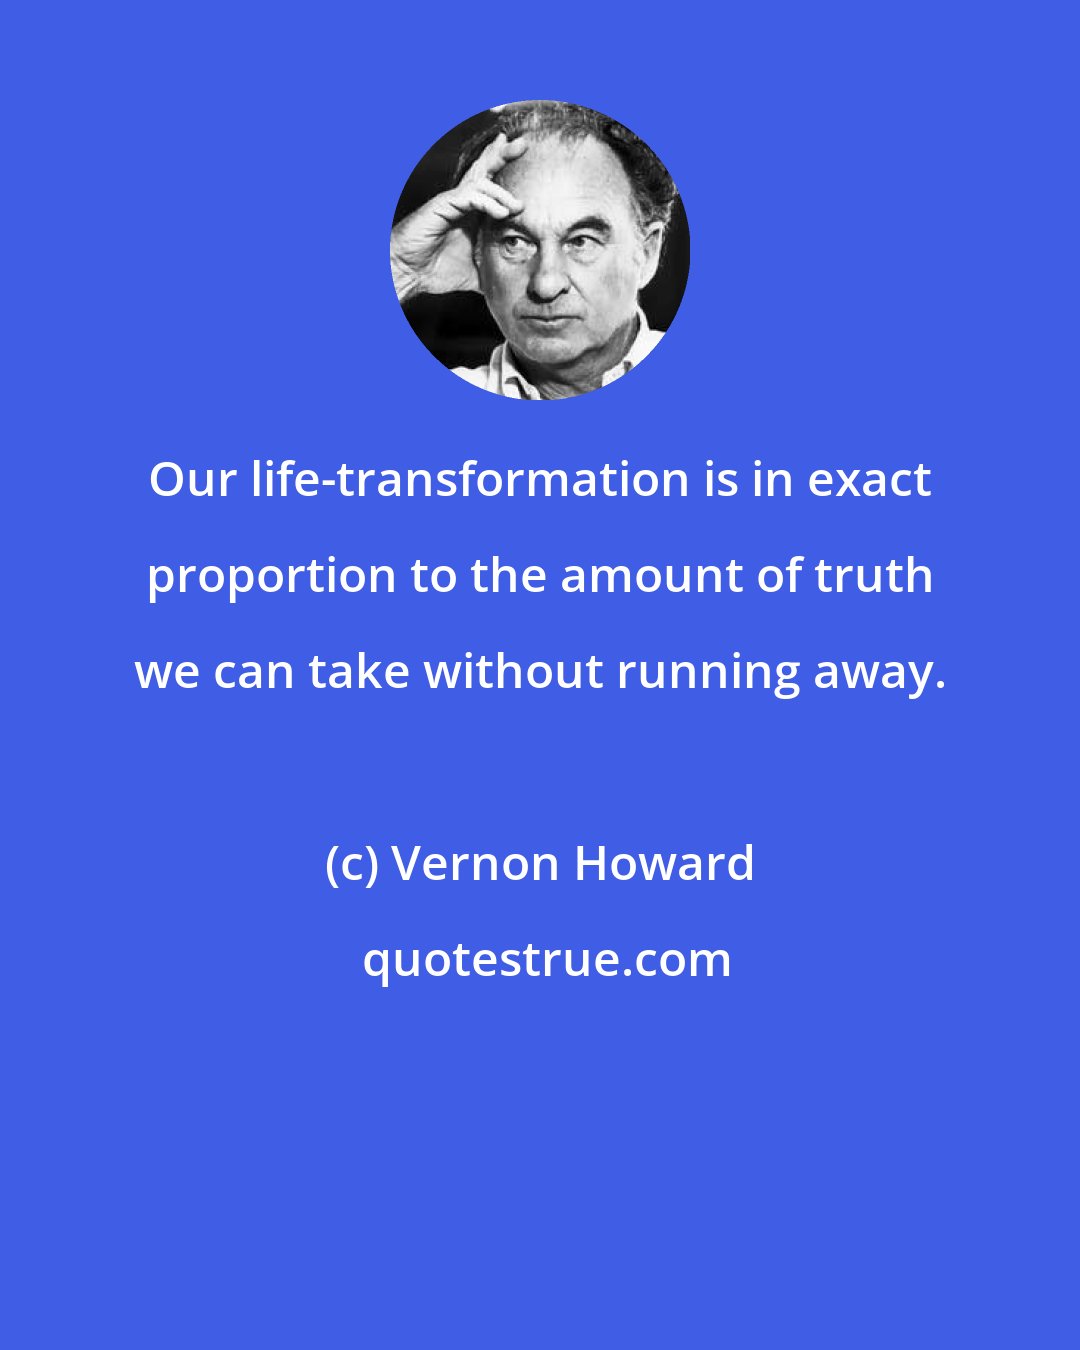 Vernon Howard: Our life-transformation is in exact proportion to the amount of truth we can take without running away.